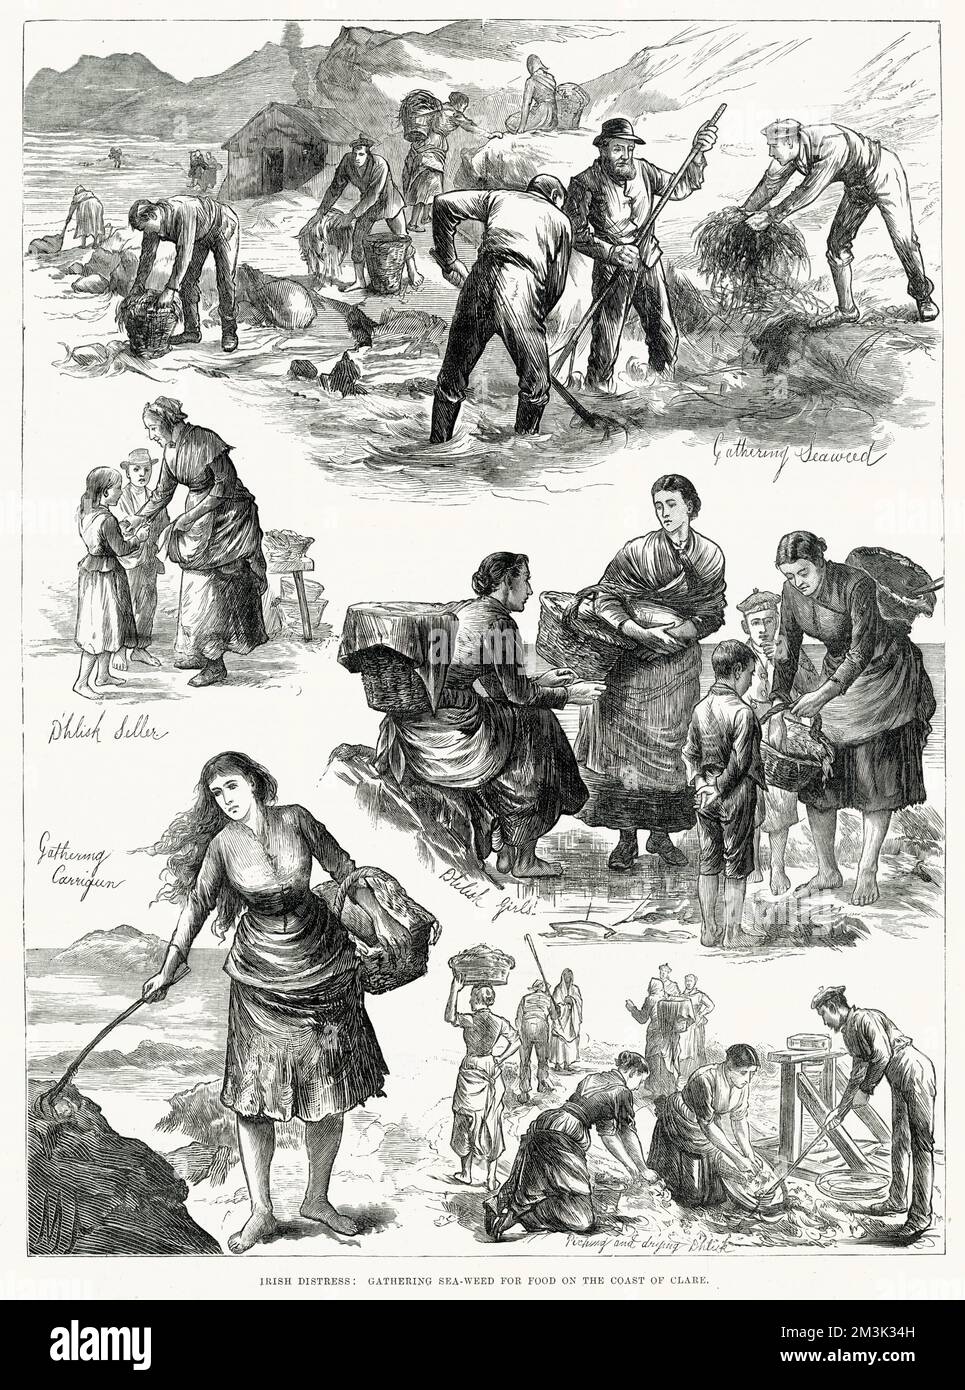 Scenes showing men, women and children gathering seaweed for food on the coast of Clare, west of Ireland. They are also shown picking, drying and selling 'd'hlisk', and gathering 'corrigan'. These alternatives were necessary due to the failure of the staple crops such as pototoes. Stock Photo